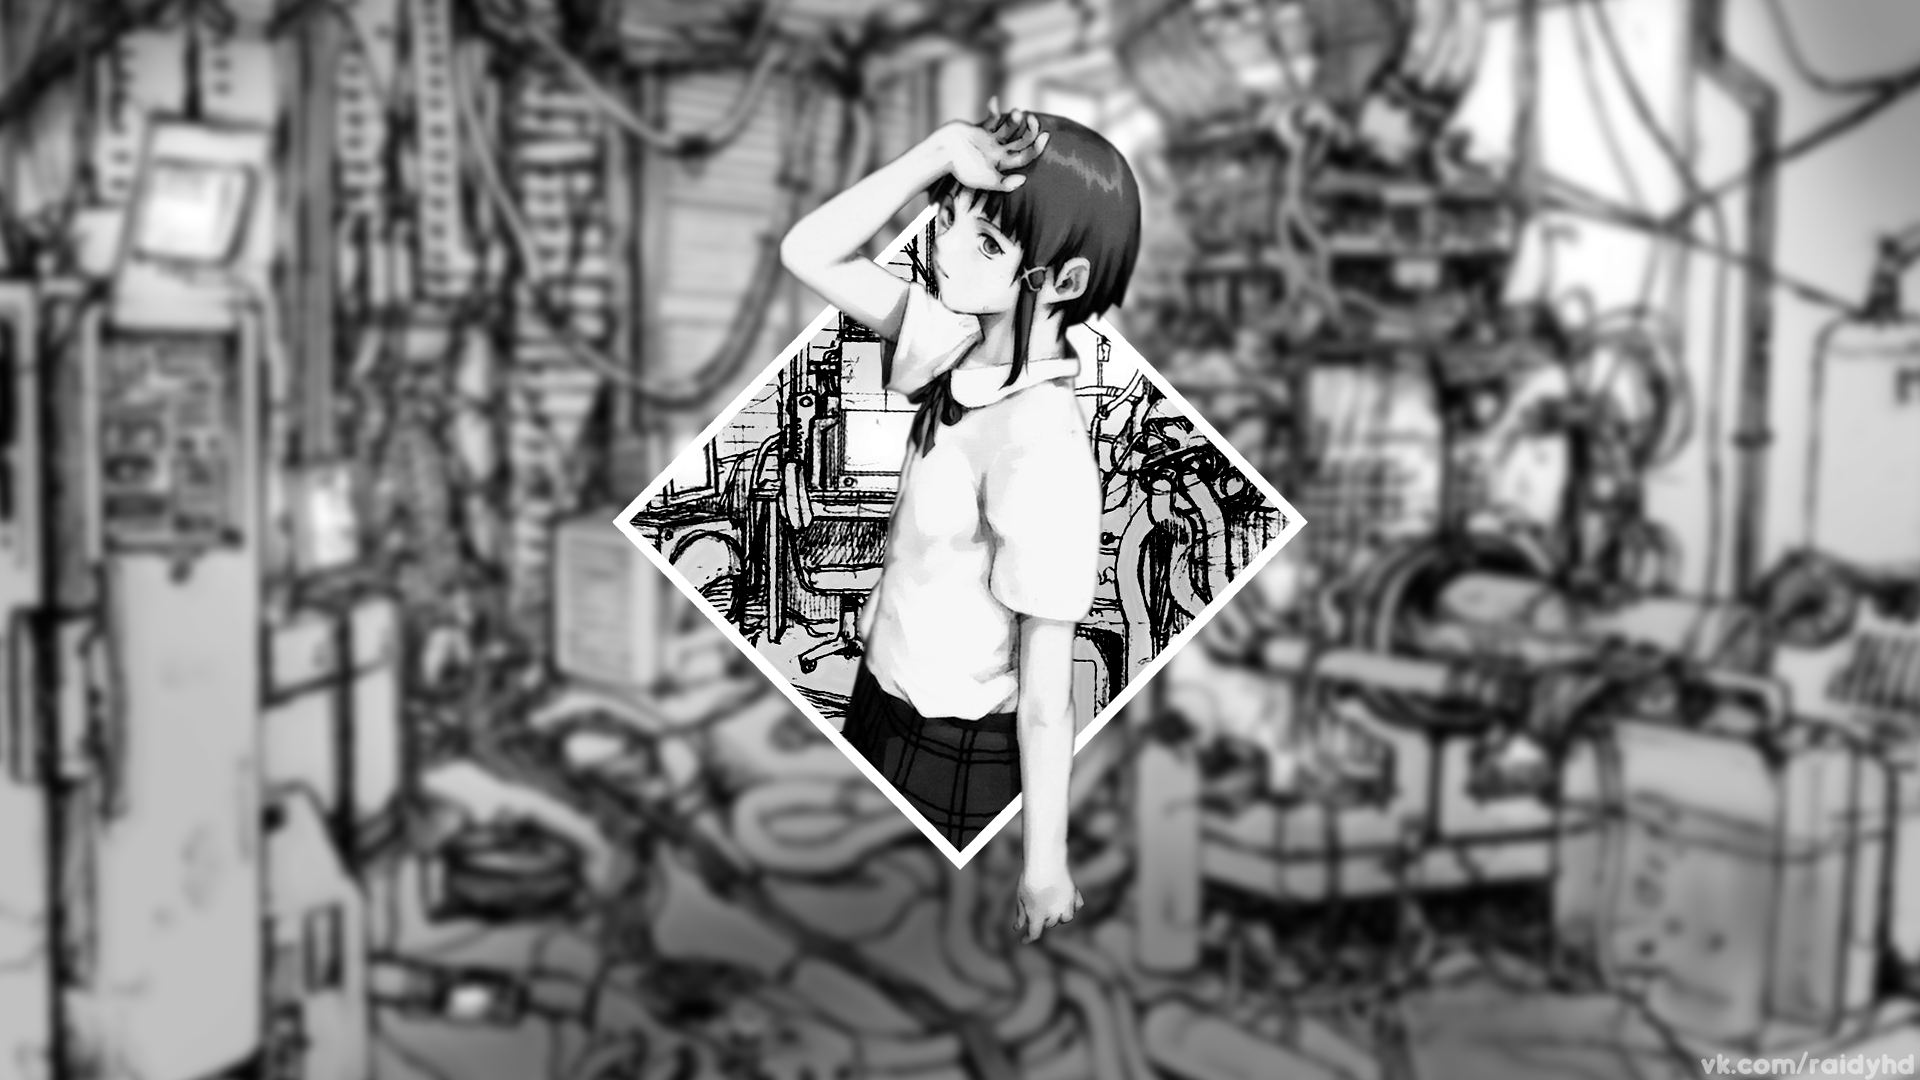 Serial Experiments Lain Anime Anime Girls Picture In Picture Wallpaper Resolution 19x1080 Id 1148 Wallha Com